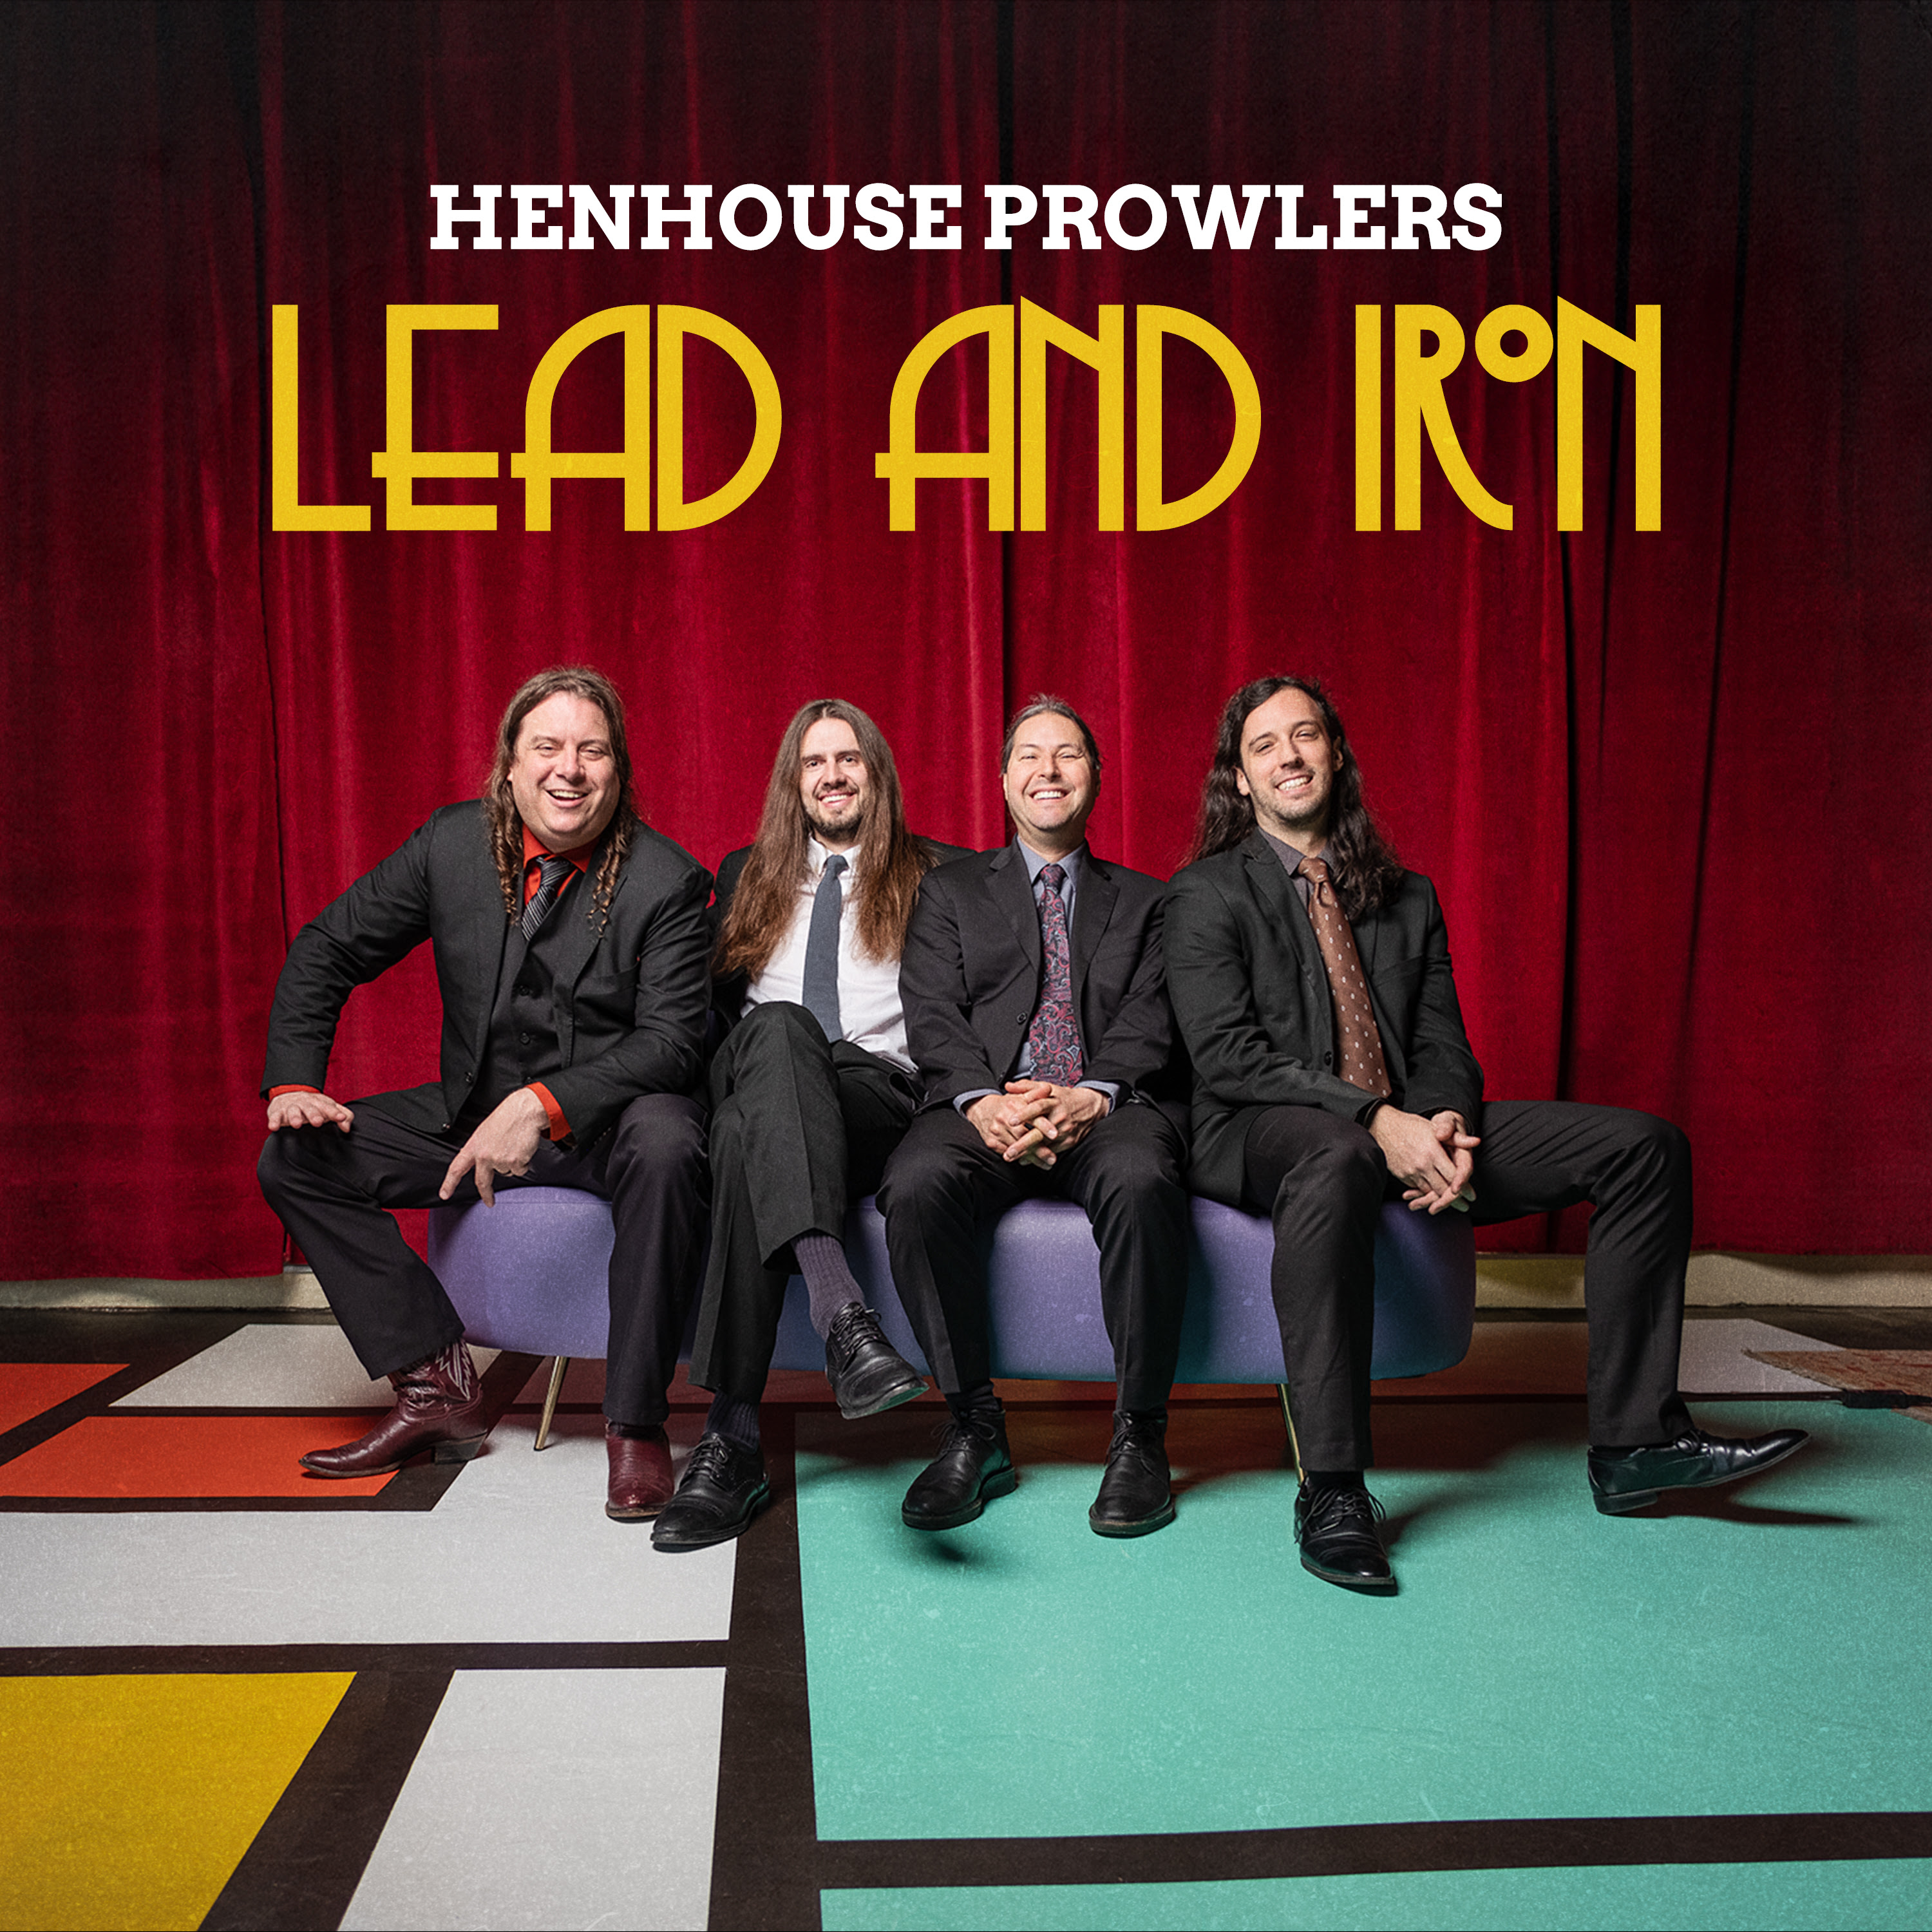 Henhouse Prowlers release new album "Lead and Iron"